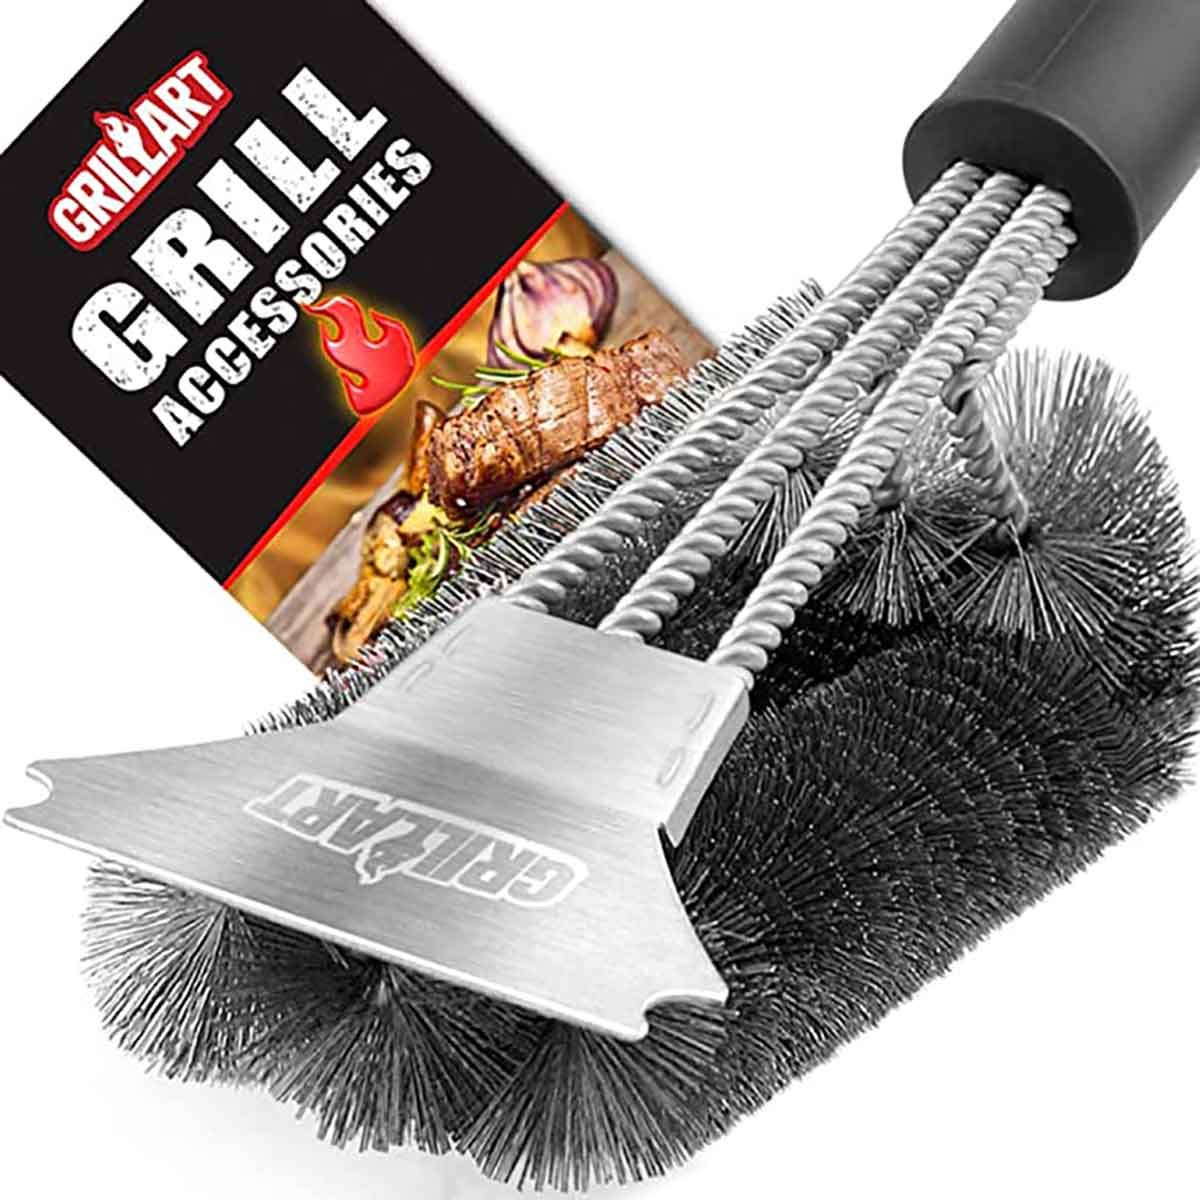 18 Grill Brush Stainless Steel Wire Bristles And Stiff Handle- Grill